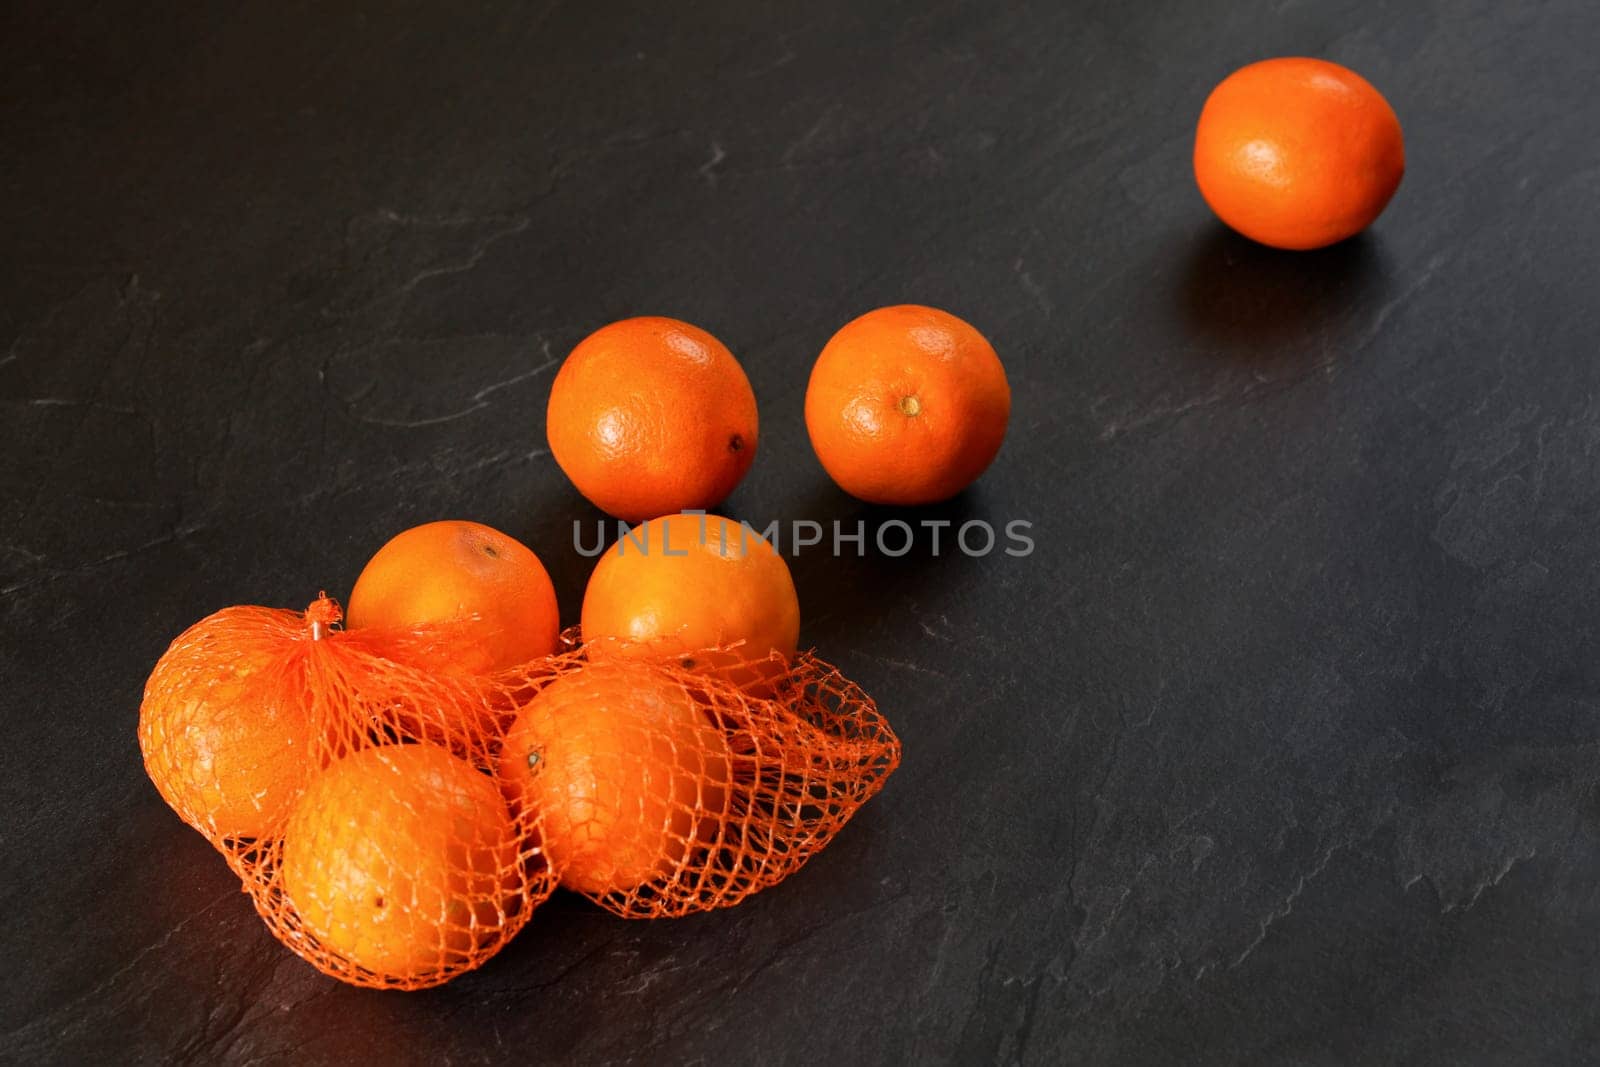 Oranges in red plastic net, some scattered on black stone like board by Ivanko